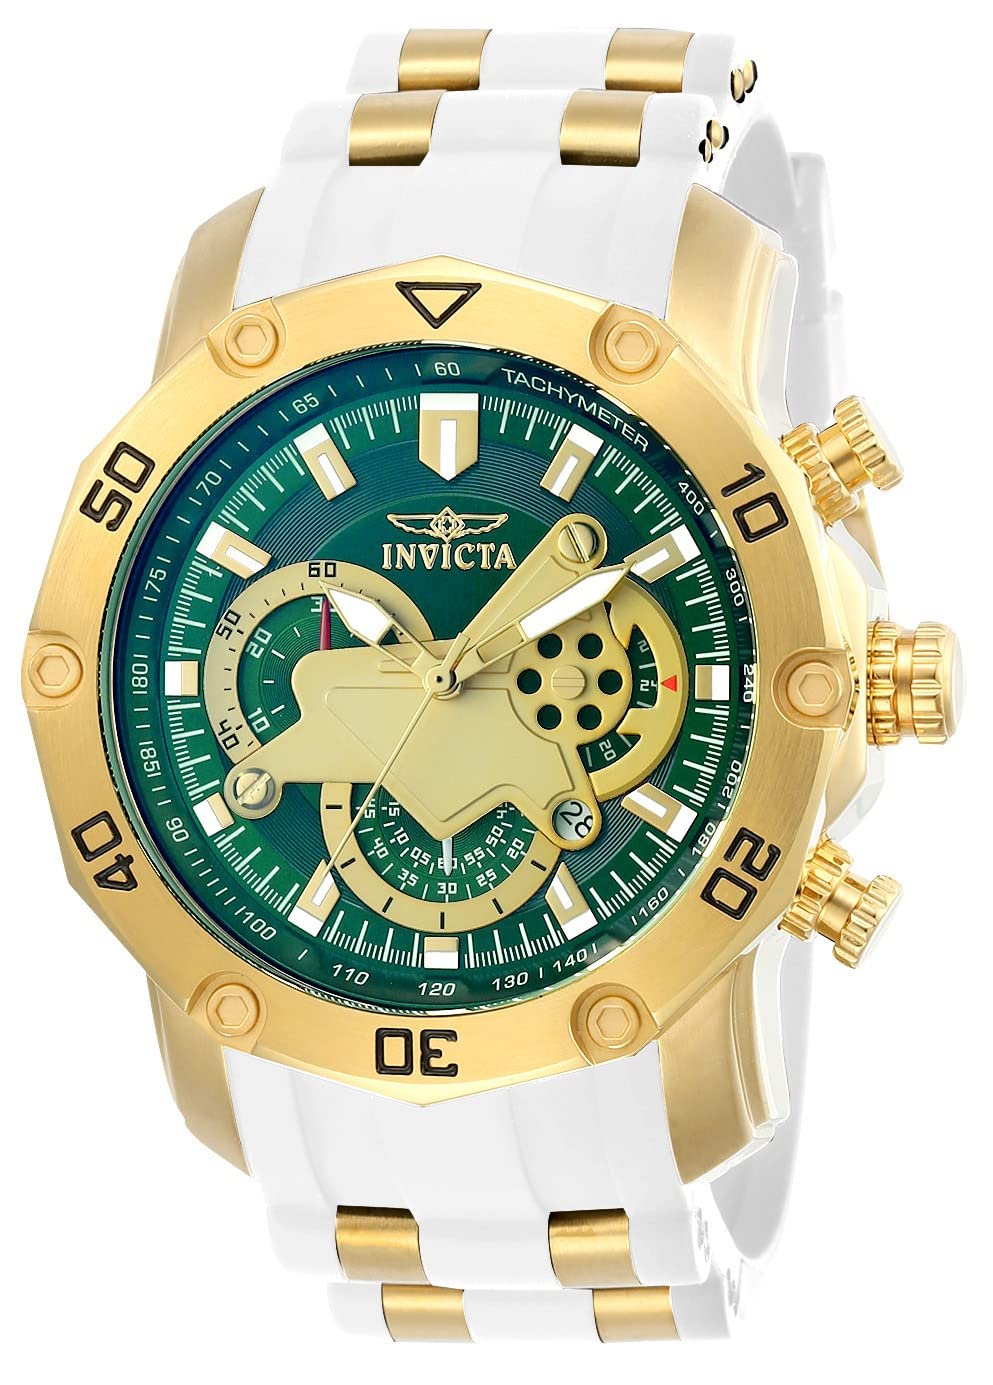 Invicta Band ONLY Pro Diver 23422